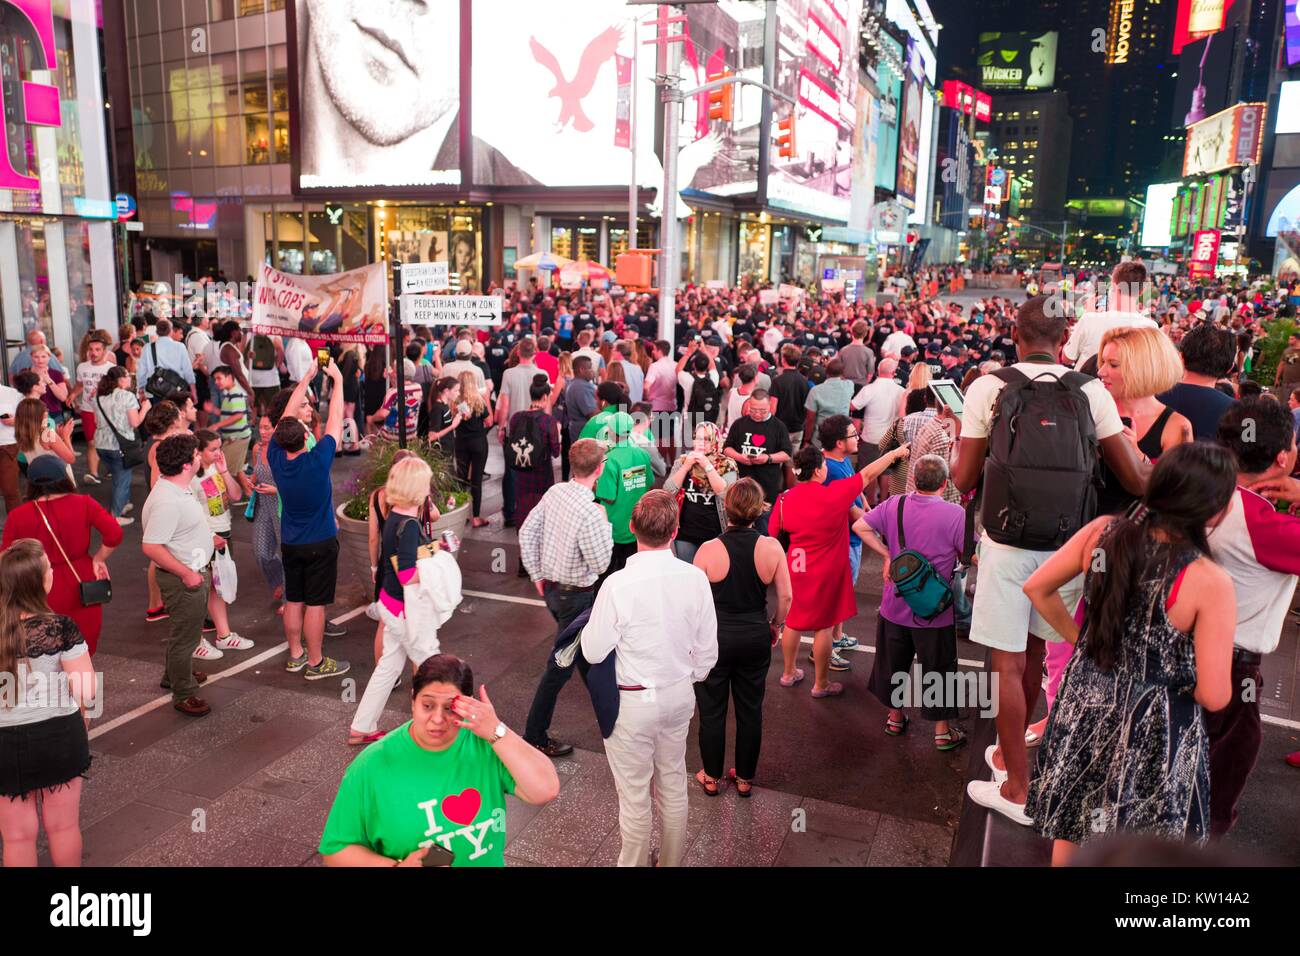 During a Black Lives Matter protest in New York City's Times Square following the shooting deaths of Alton Sterling and Philando Castile, activists block traffic and square off against a line of New York Police Department (NYPD) riot police as tourists look on, 2016. Stock Photo